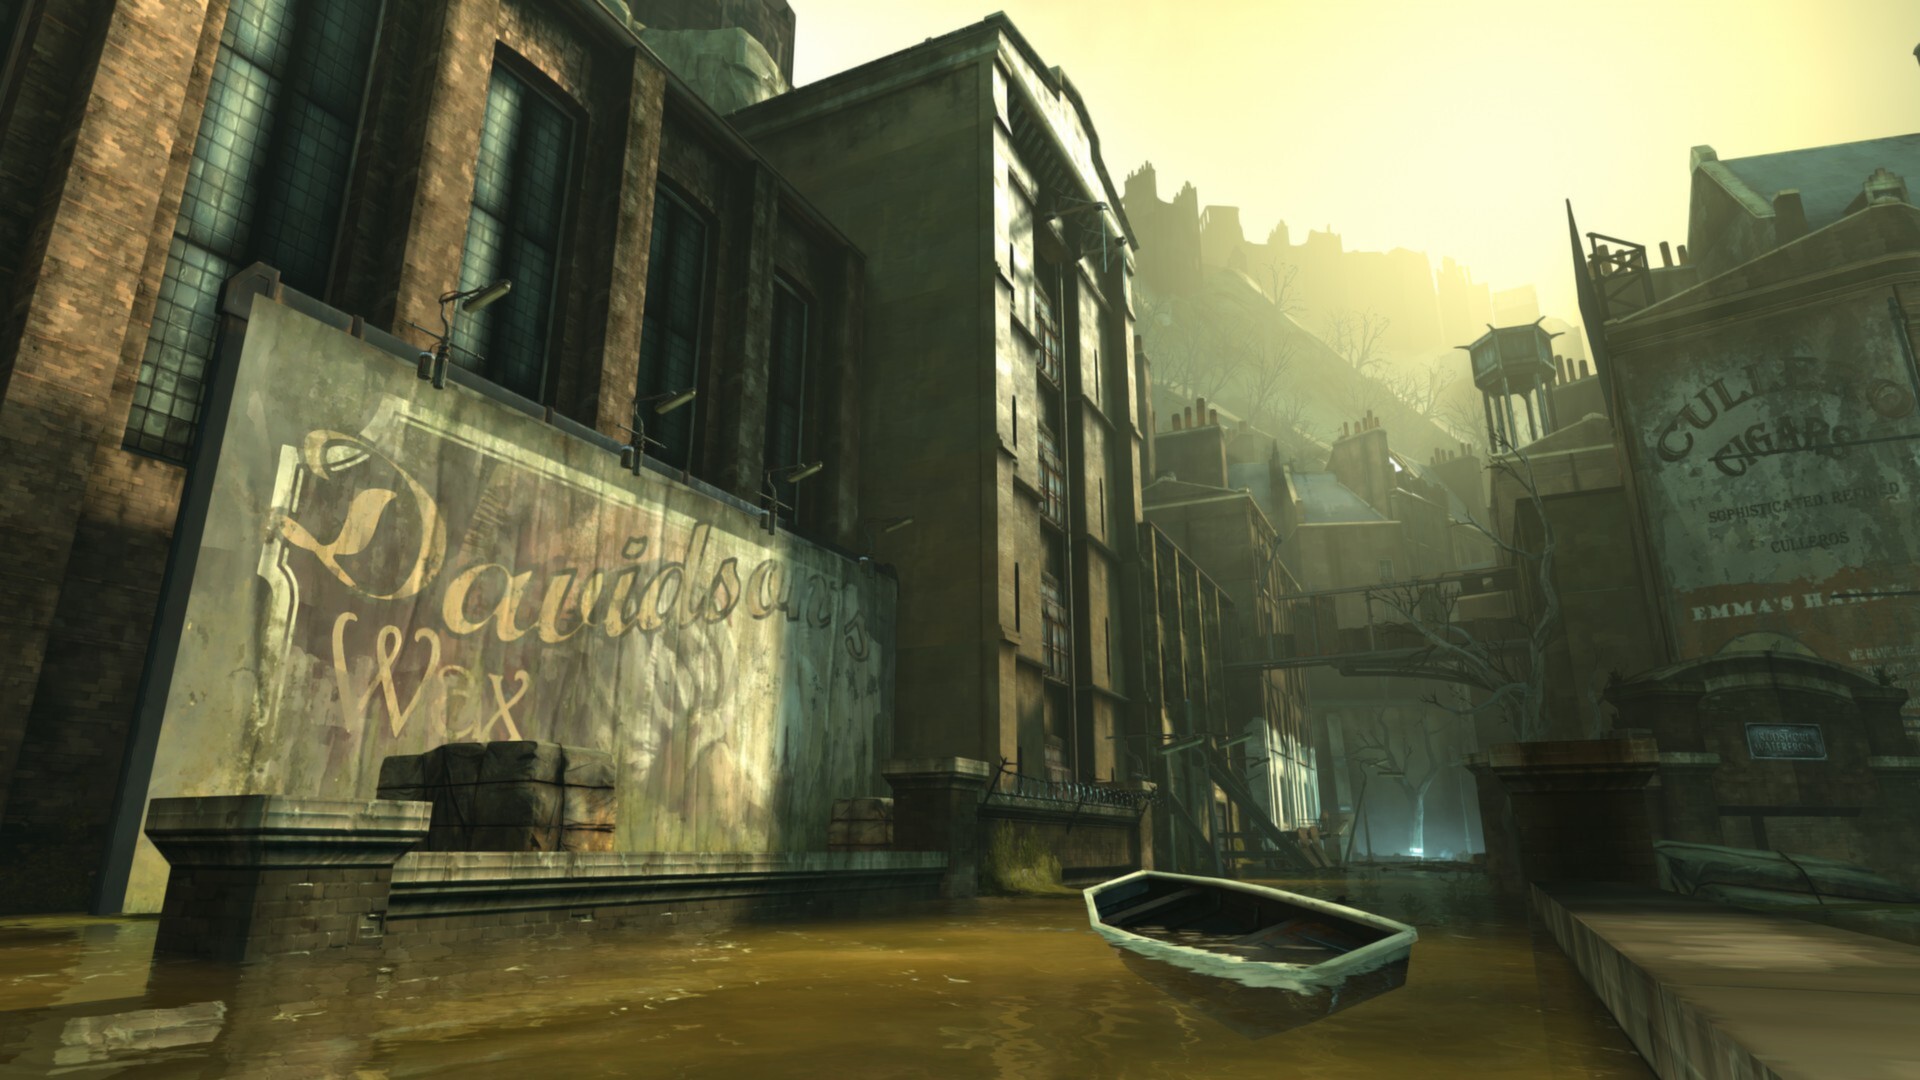 Buy cheap Dishonored - Definitive Edition cd key - lowest price